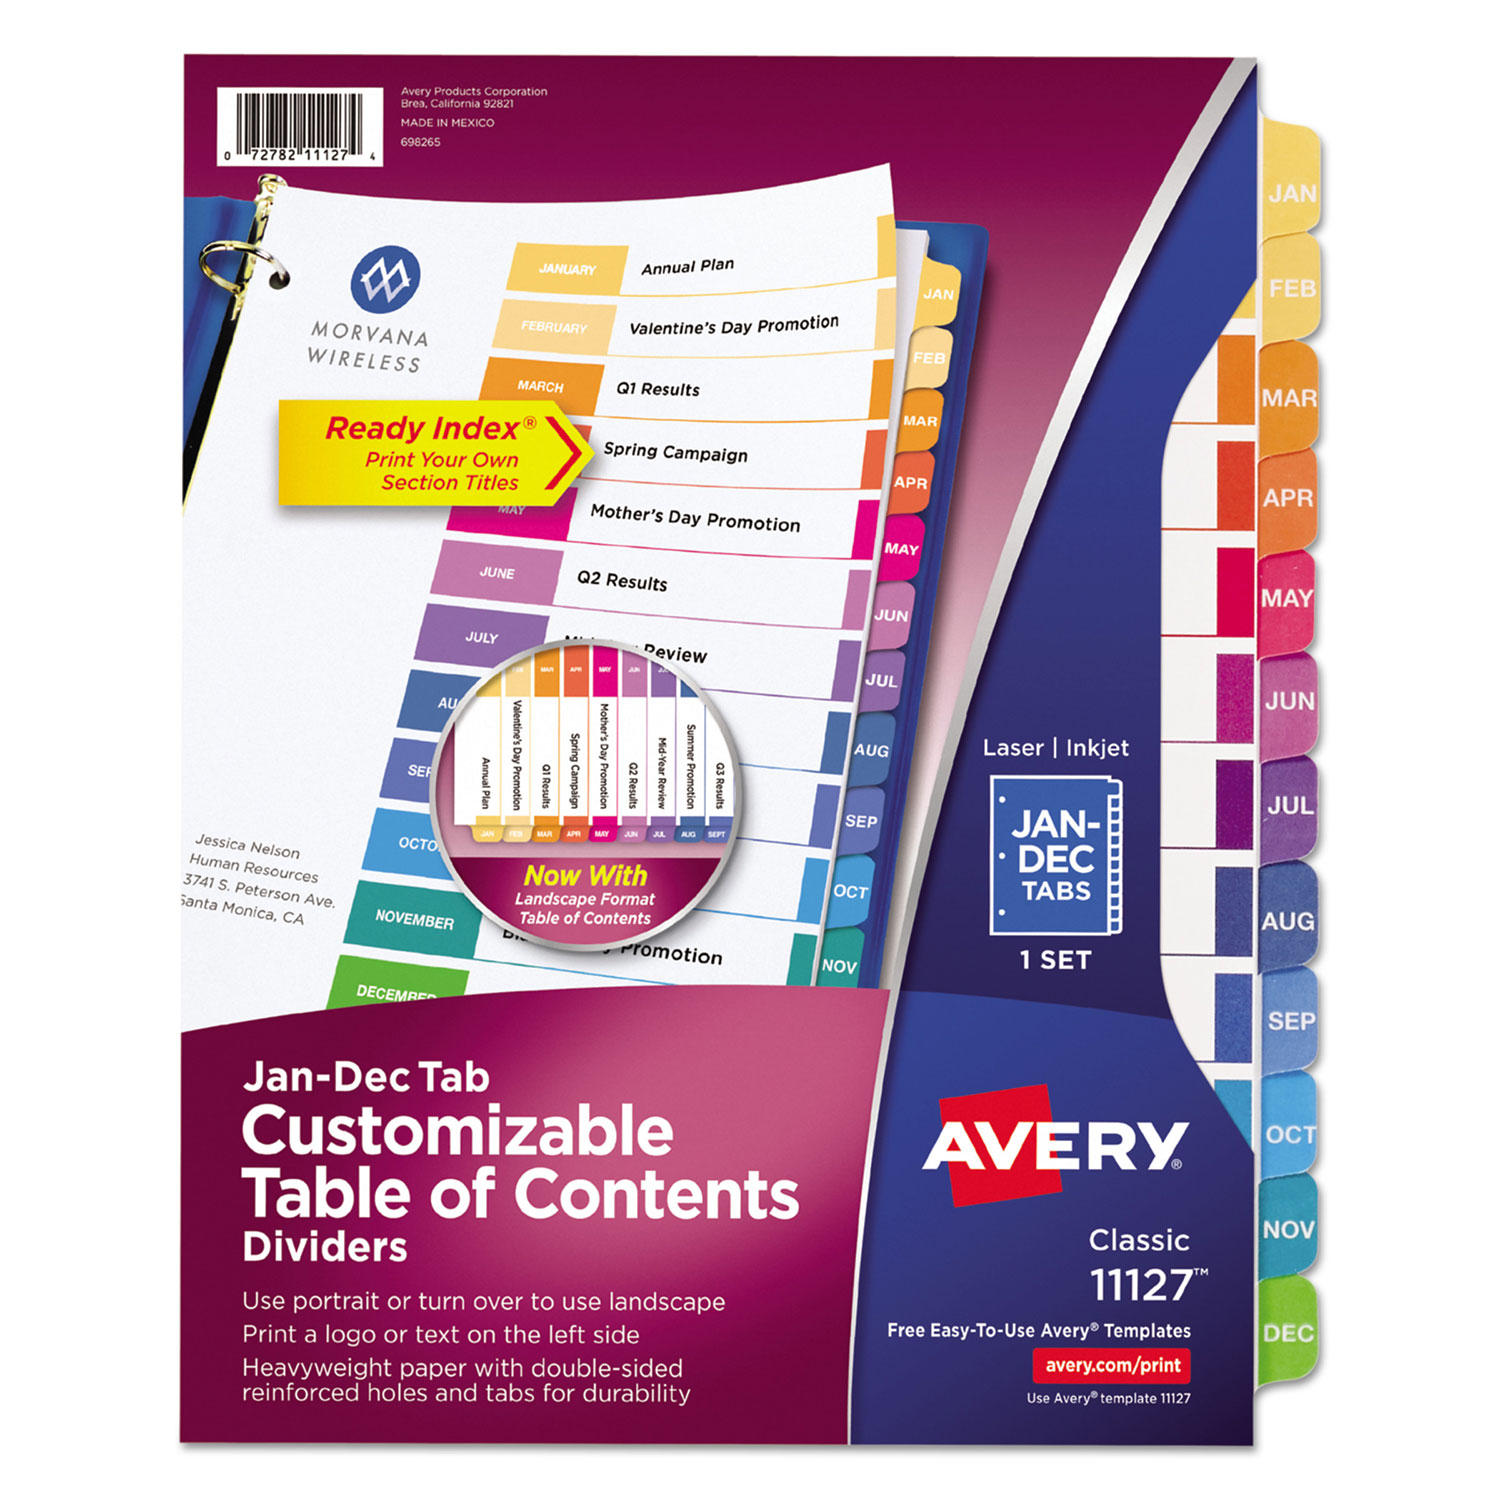 Avery 11127 - Ready Index Table of Contents Dividers - Jan to Dec